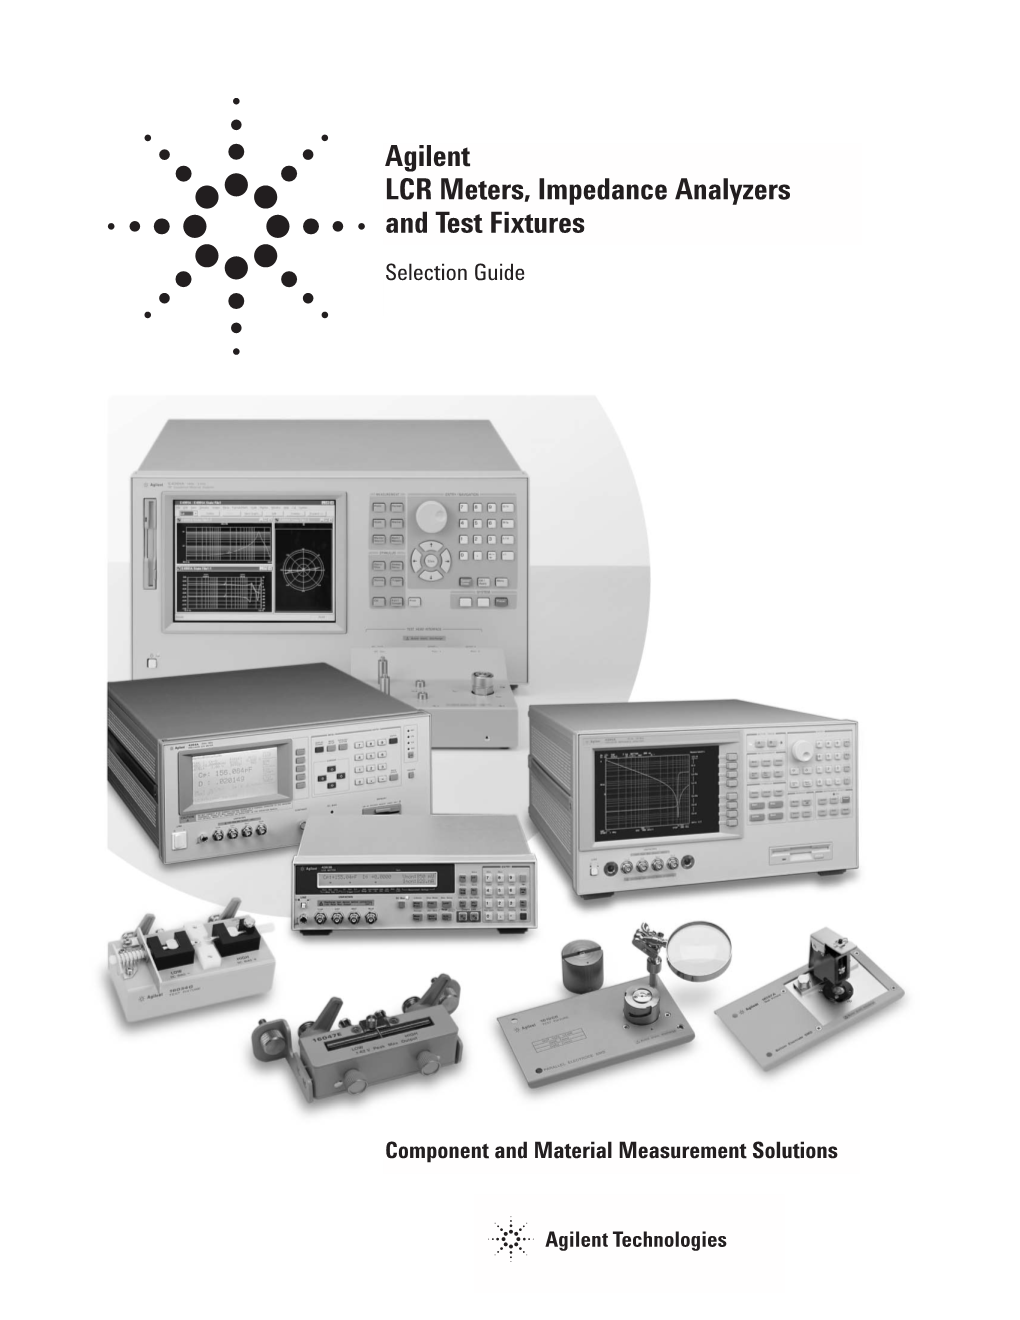 Agilent LCR Meters, Impedance Analyzers and Test Fixtures Selection Guide